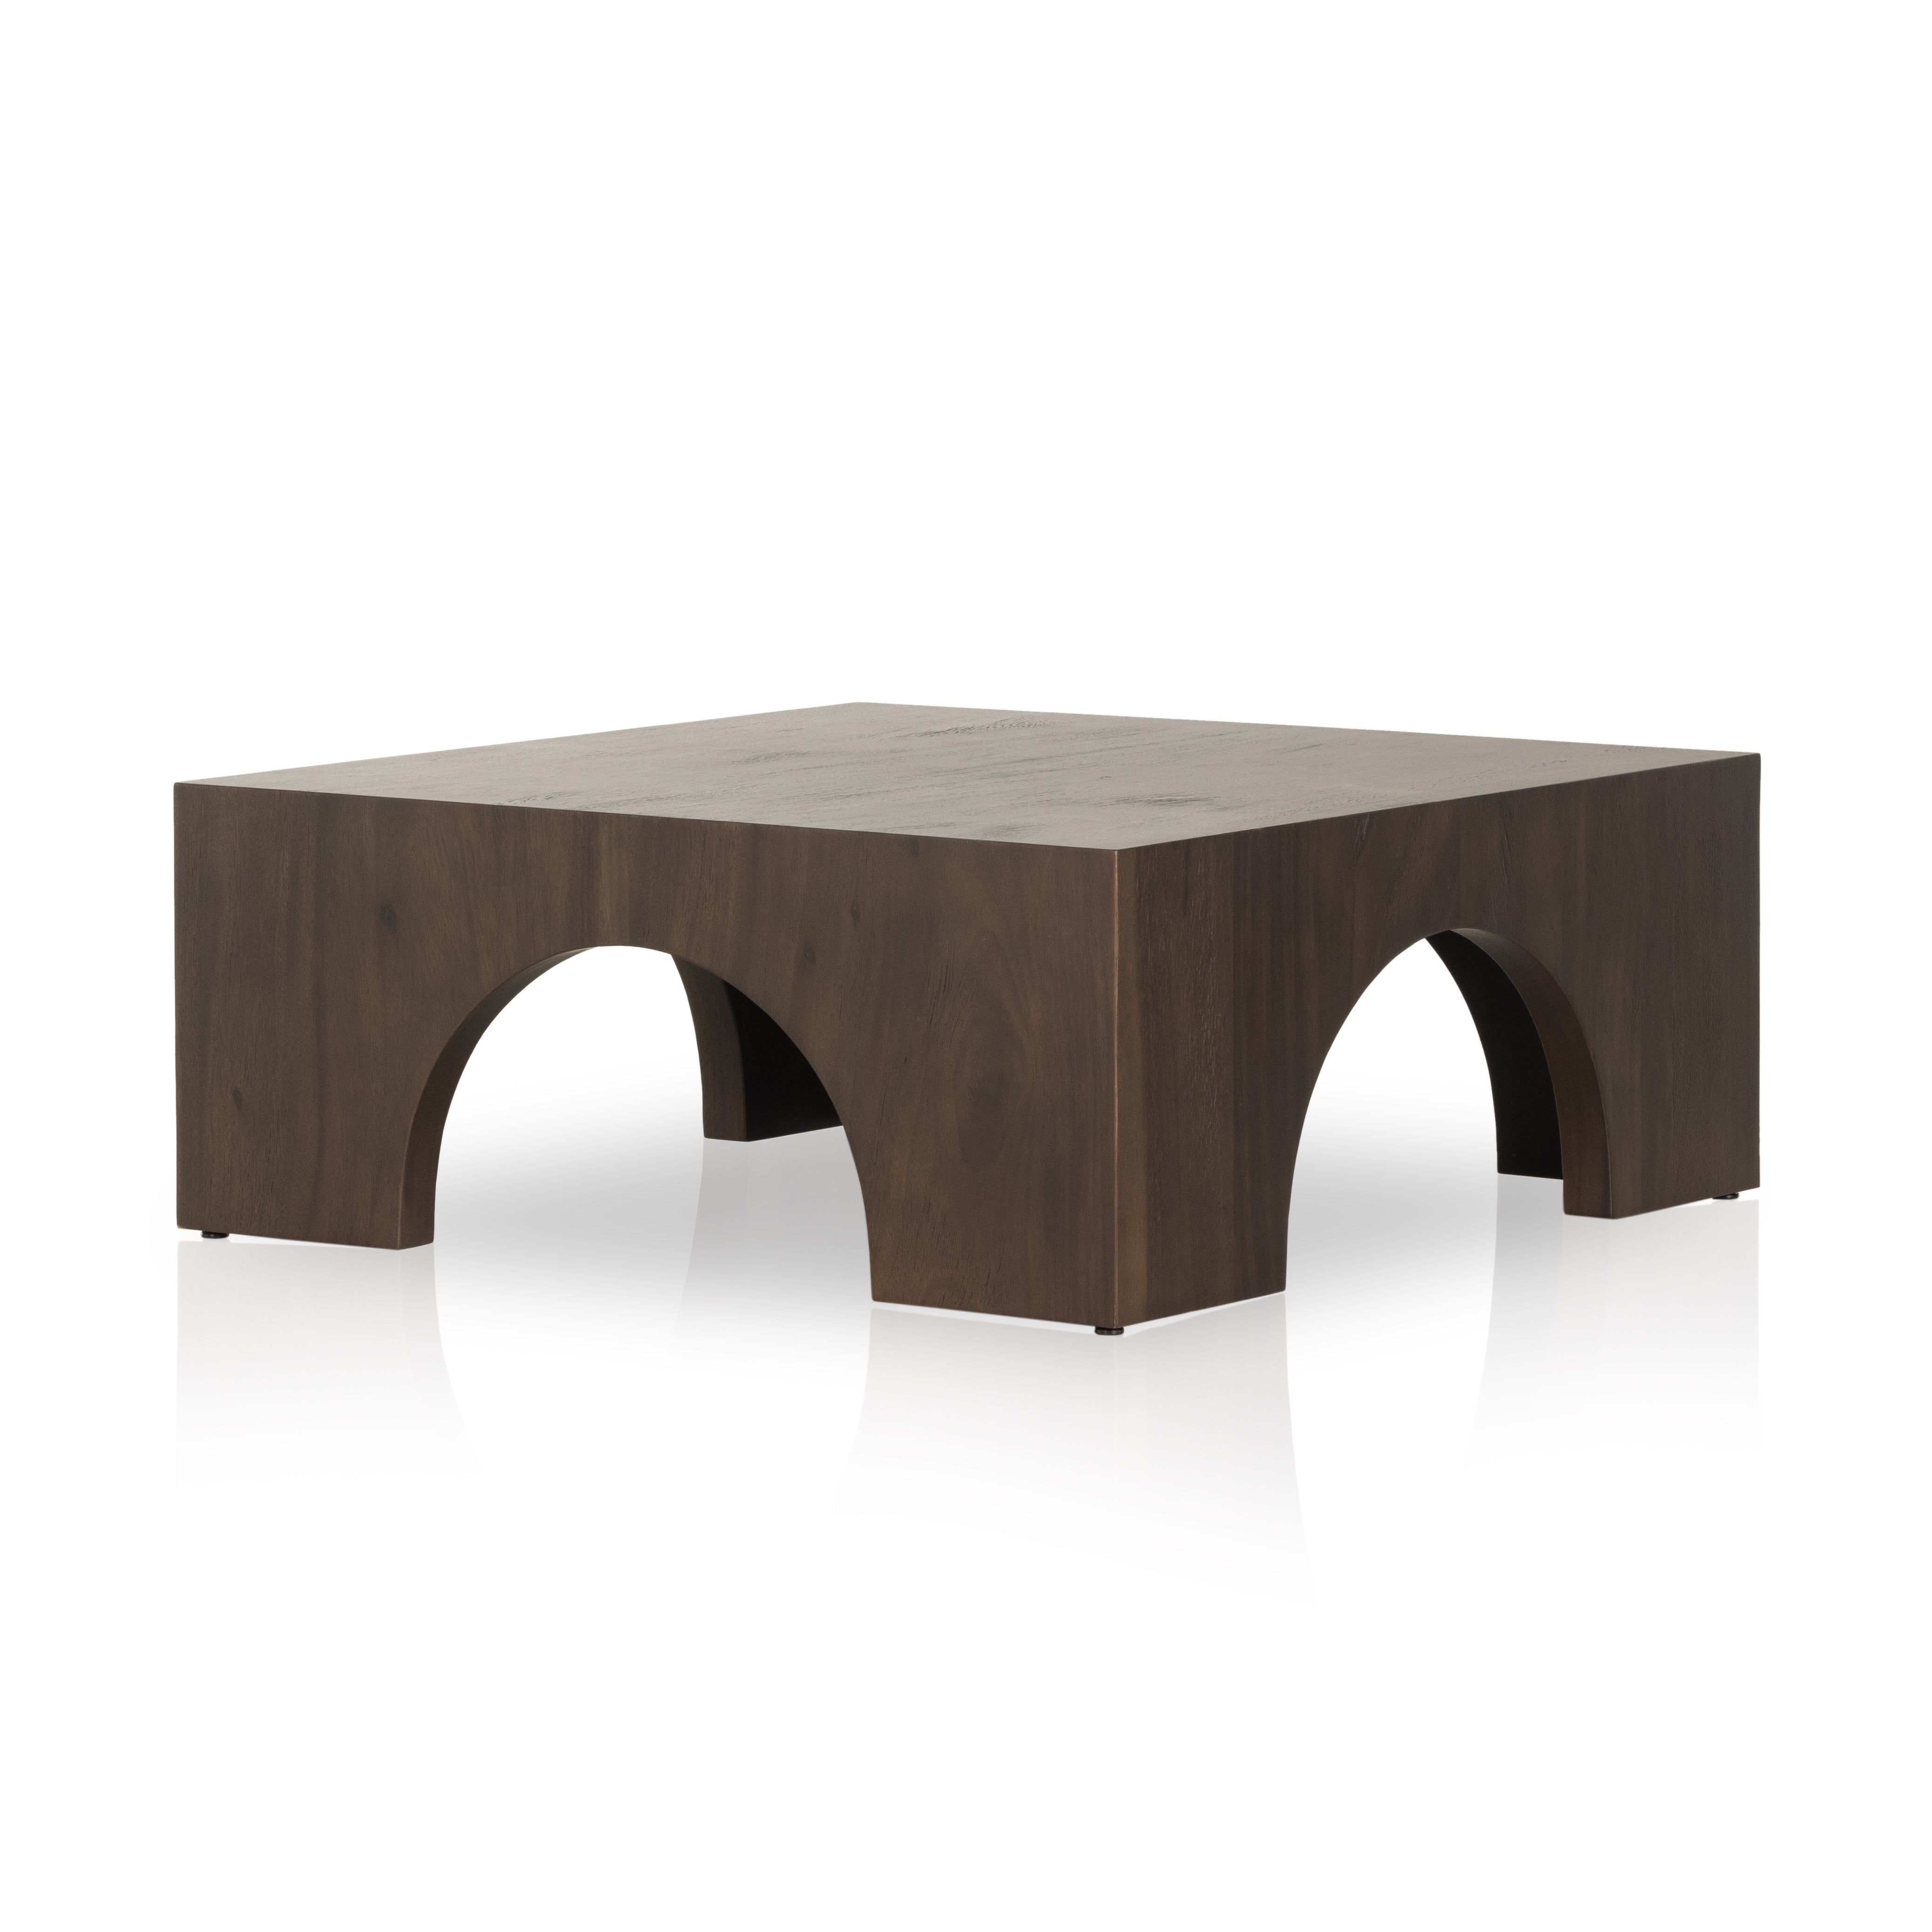 Clean and simple, with great impact. Made from beautiful Guanacaste in a natural hue, shapely arches and block corners speak to the architectural inspiration behind this eye-catching coffee table. Amethyst Home provides interior design, new construction, custom furniture, and area rugs in the Austin metro area.